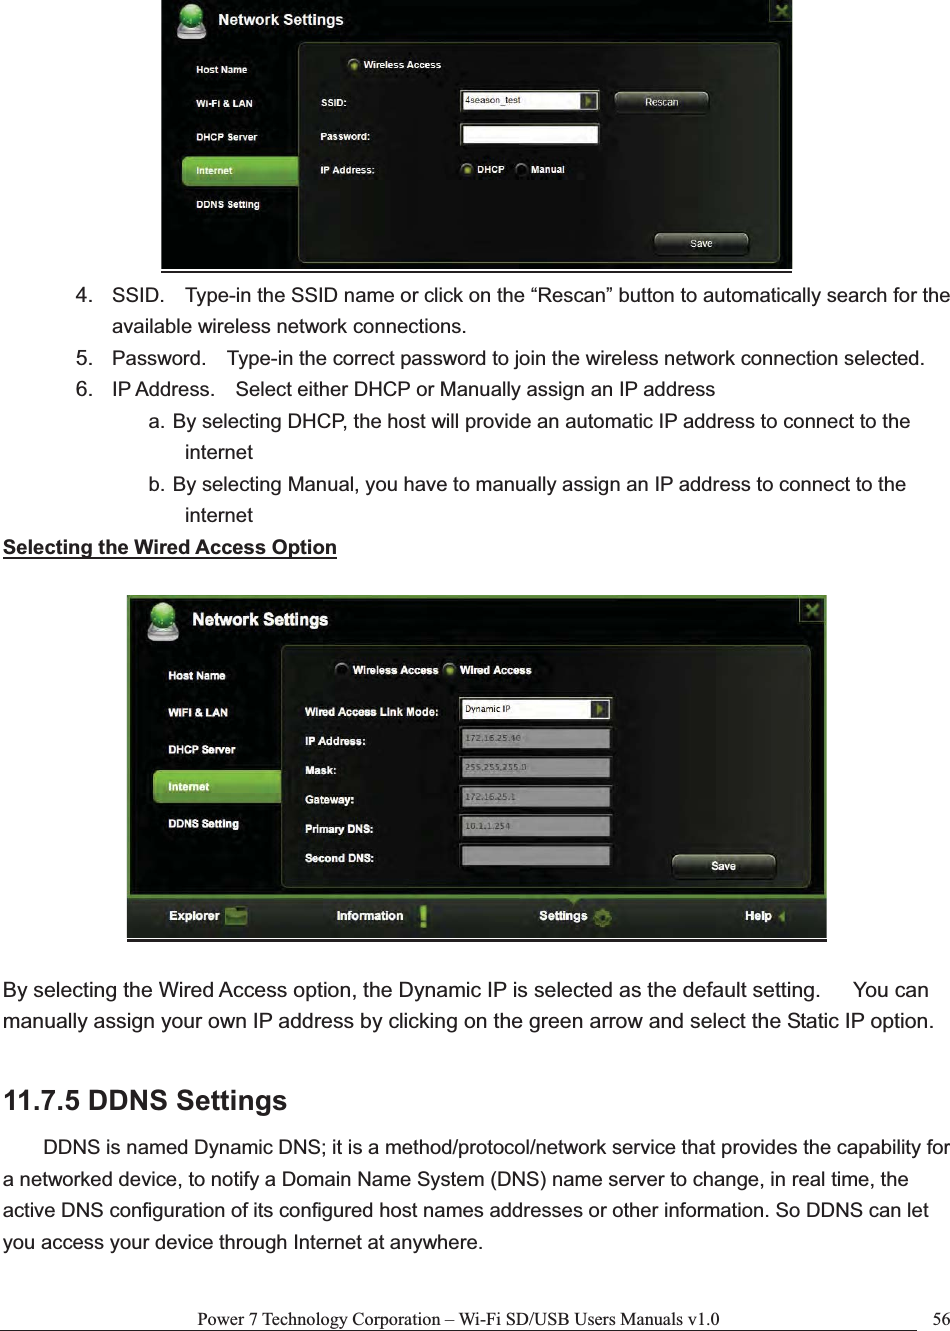 Power 7 Technology Corporation – Wi-Fi SD/USB Users Manuals v1.0  564. SSID.    Type-in the SSID name or click on the “Rescan” button to automatically search for the available wireless network connections. 5. Password.    Type-in the correct password to join the wireless network connection selected.     6. IP Address.    Select either DHCP or Manually assign an IP address a. By selecting DHCP, the host will provide an automatic IP address to connect to the internet b. By selecting Manual, you have to manually assign an IP address to connect to the internet Selecting the Wired Access OptionBy selecting the Wired Access option, the Dynamic IP is selected as the default setting.      You can manually assign your own IP address by clicking on the green arrow and select the Static IP option. 11.7.5 DDNS Settings DDNS is named Dynamic DNS; it is a method/protocol/network service that provides the capability for a networked device, to notify a Domain Name System (DNS) name server to change, in real time, the active DNS configuration of its configured host names addresses or other information. So DDNS can let you access your device through Internet at anywhere. 